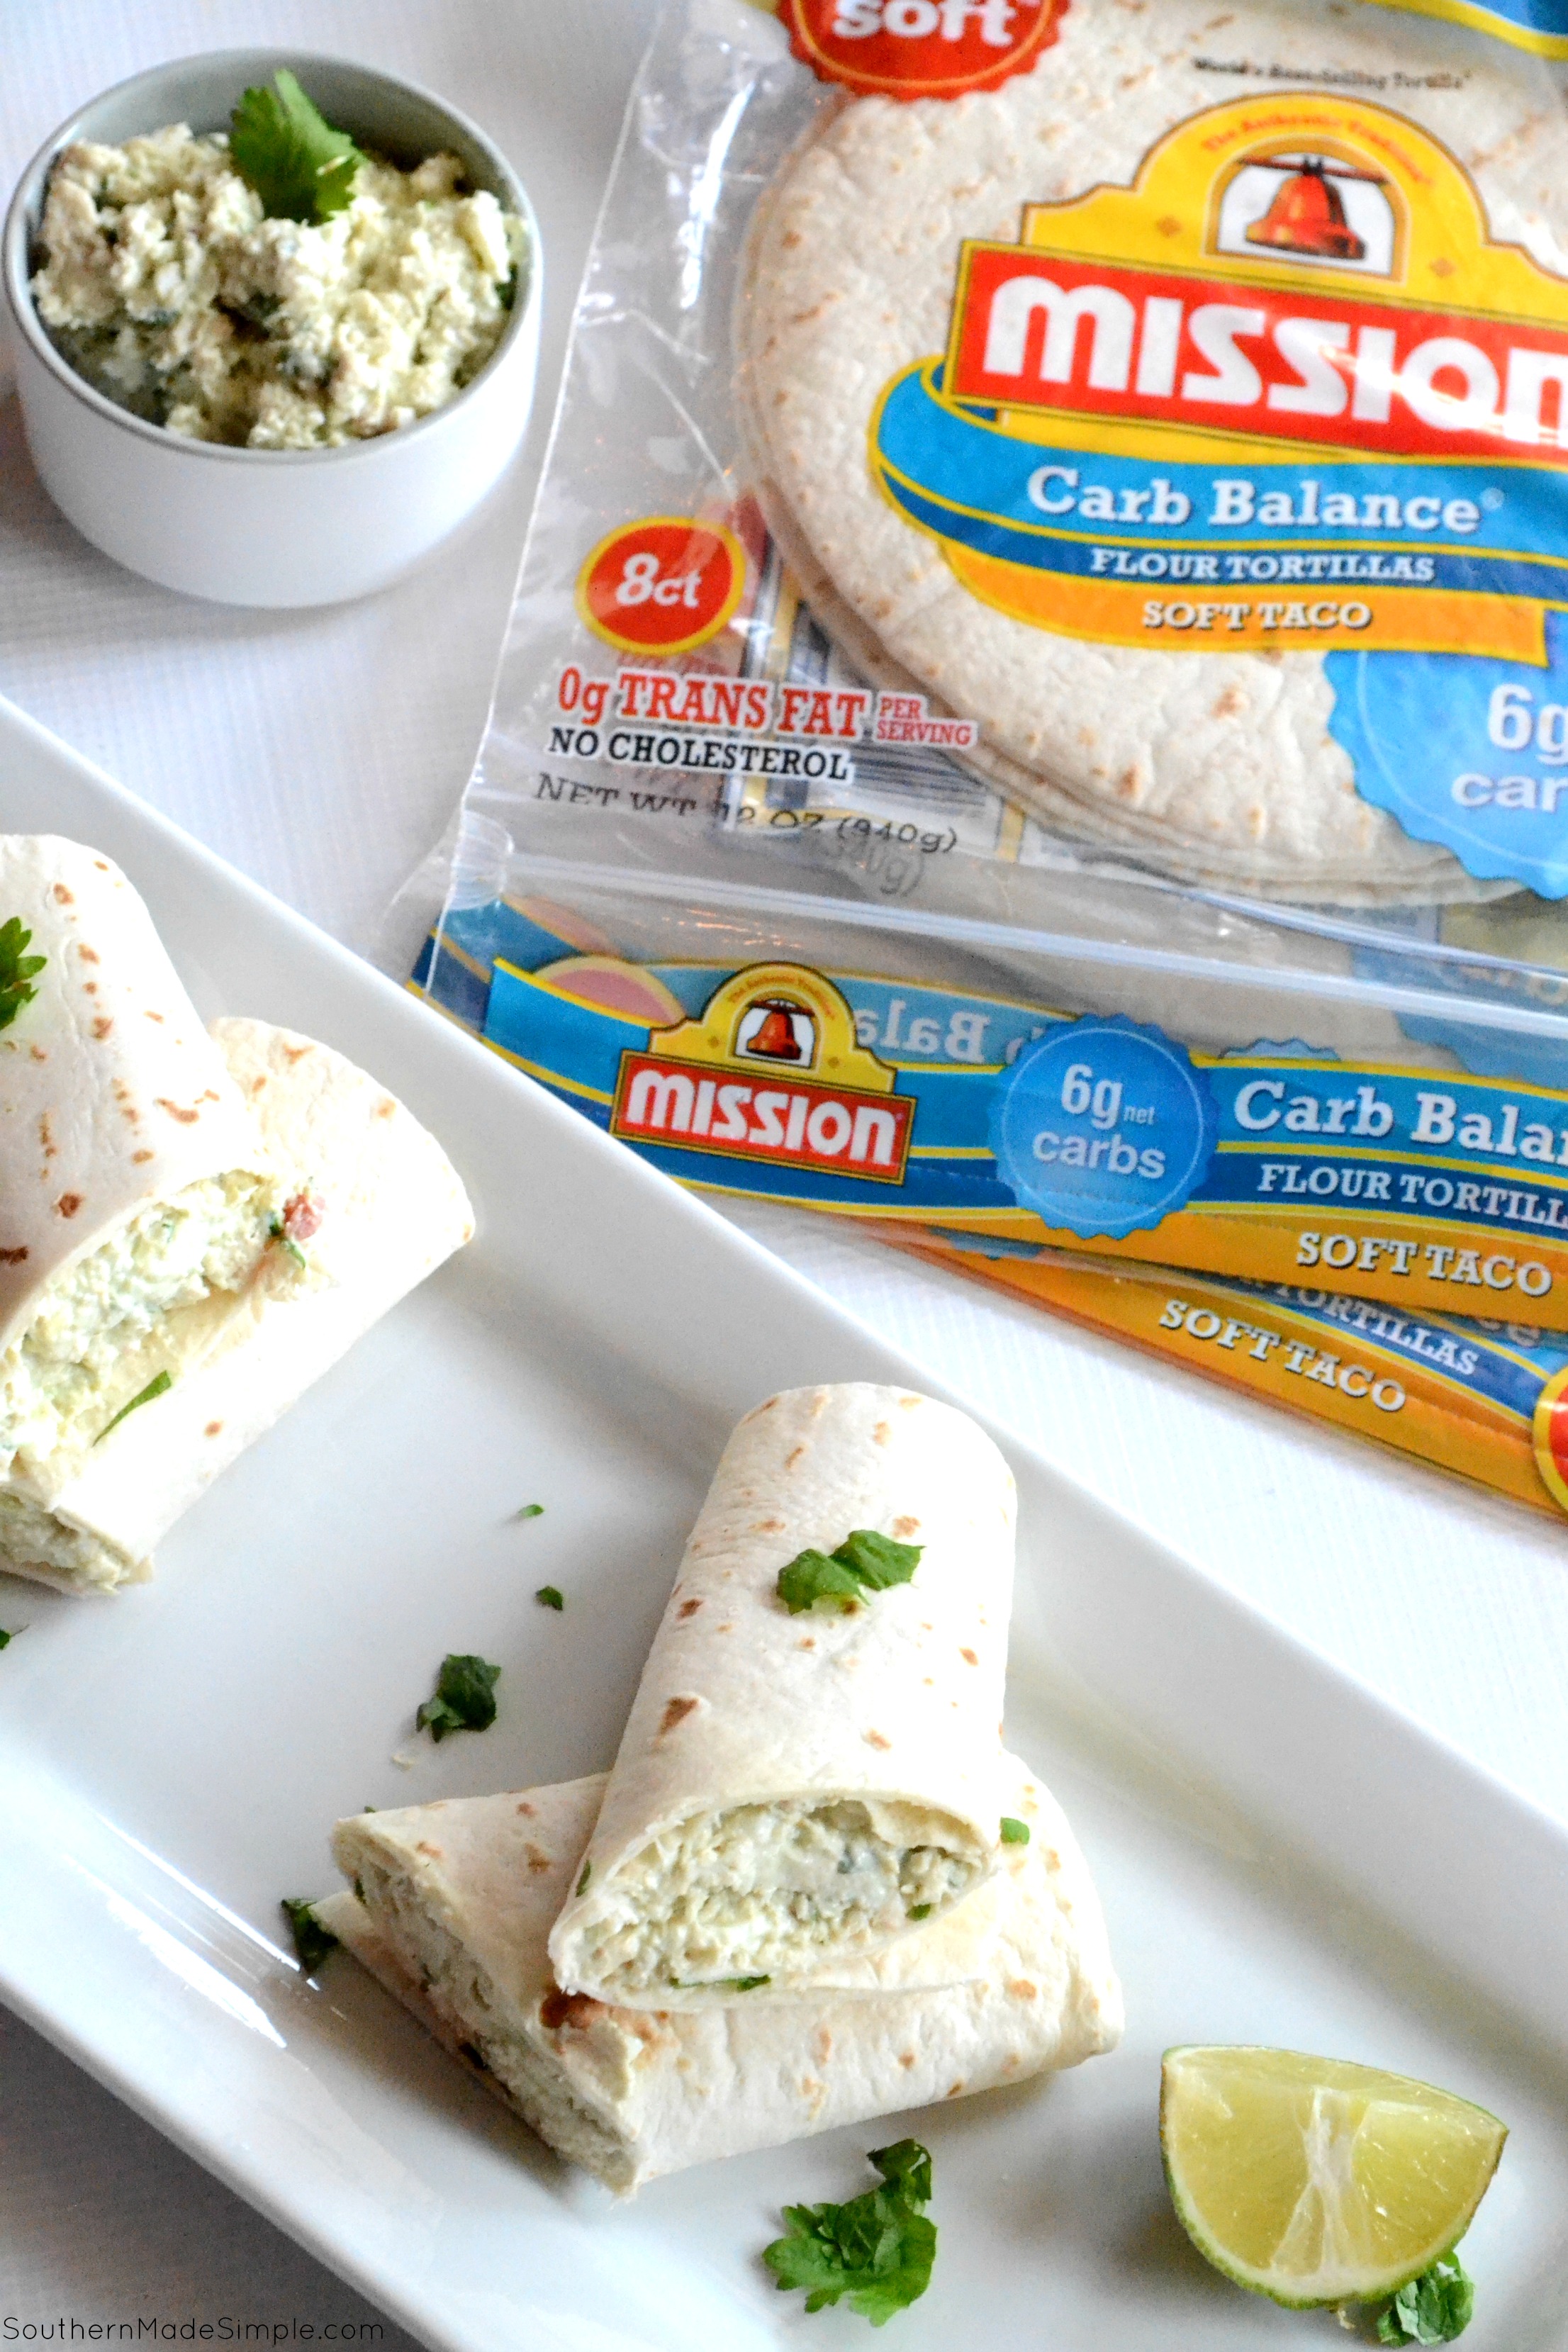 Keep your new year's resolutions in check with these low carb Creamy Avocado Chicken Salad Wraps made with Mission Carb Balance Soft Flour Tortillas! #ad #MissionToChange #Sweepstakes